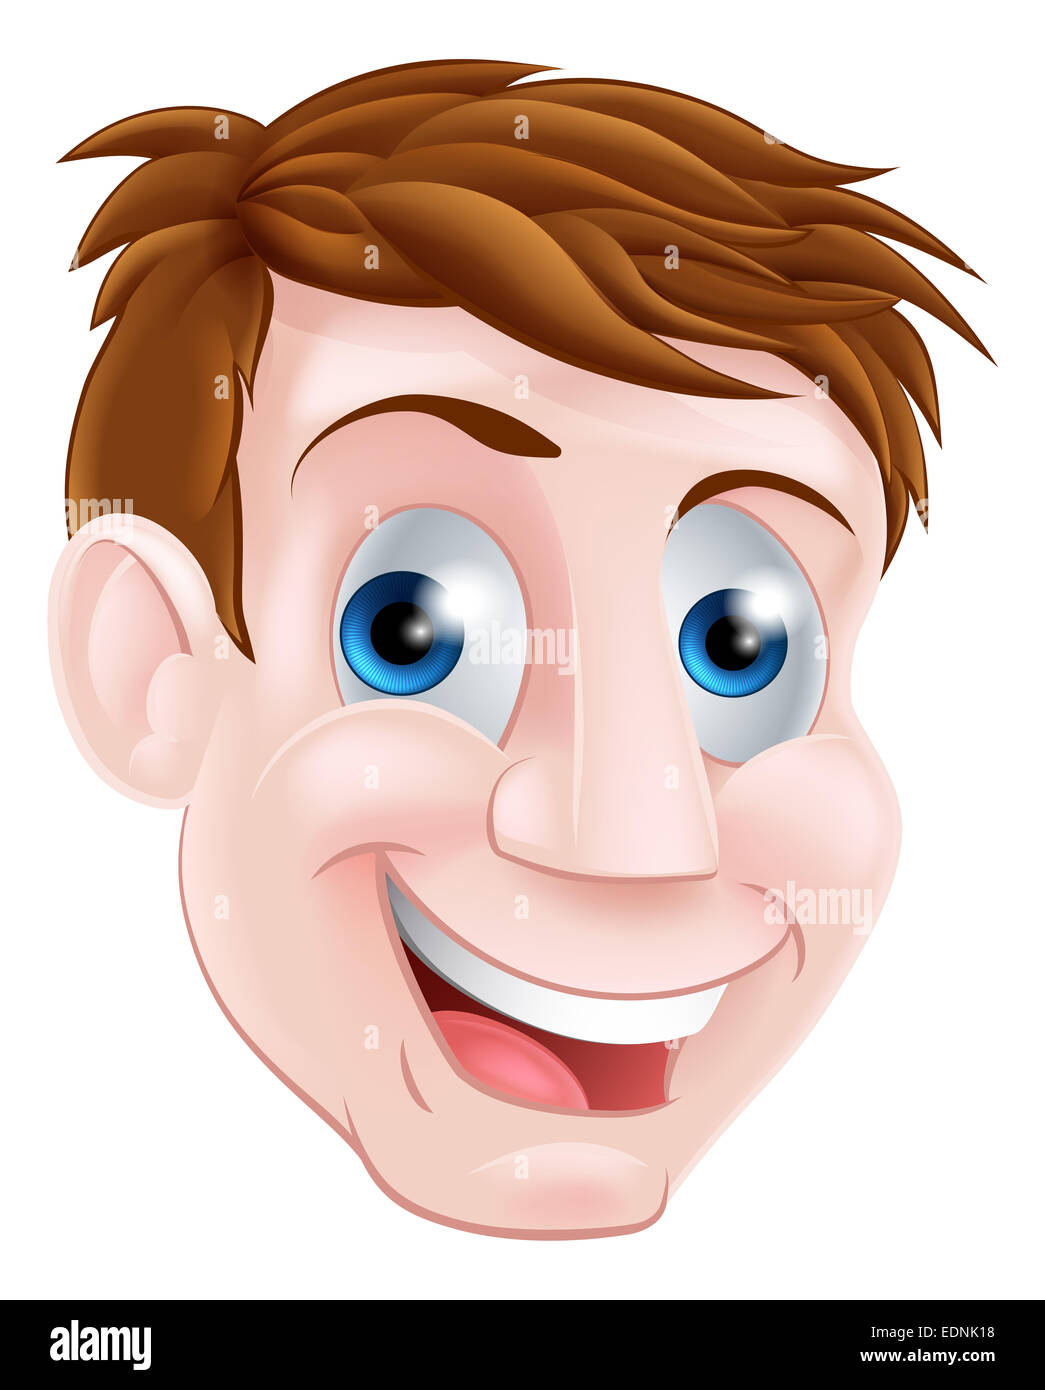 A happy smiling cartoon character mans face Stock Photo